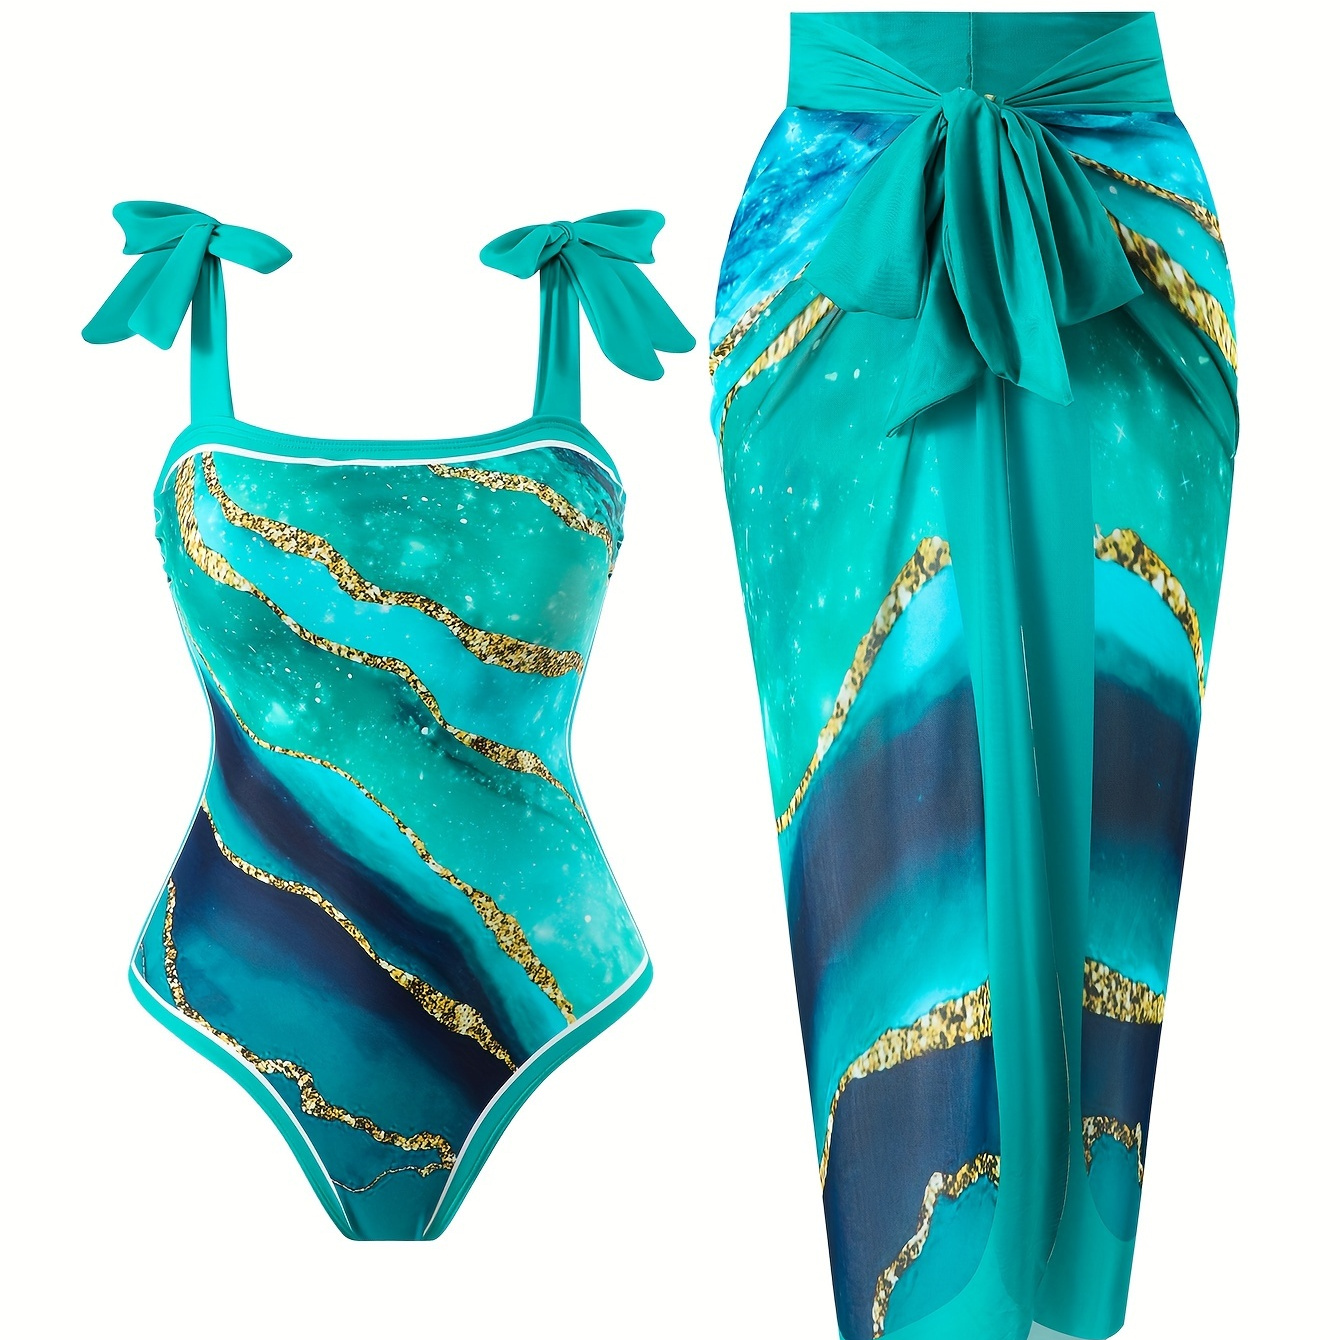 

Women's Plus Size Fashion One-piece Swimsuit With Beach Skirt Cover-up, Conservative Style, Blue & Golden Marble Pattern, Bow Tie Shoulders